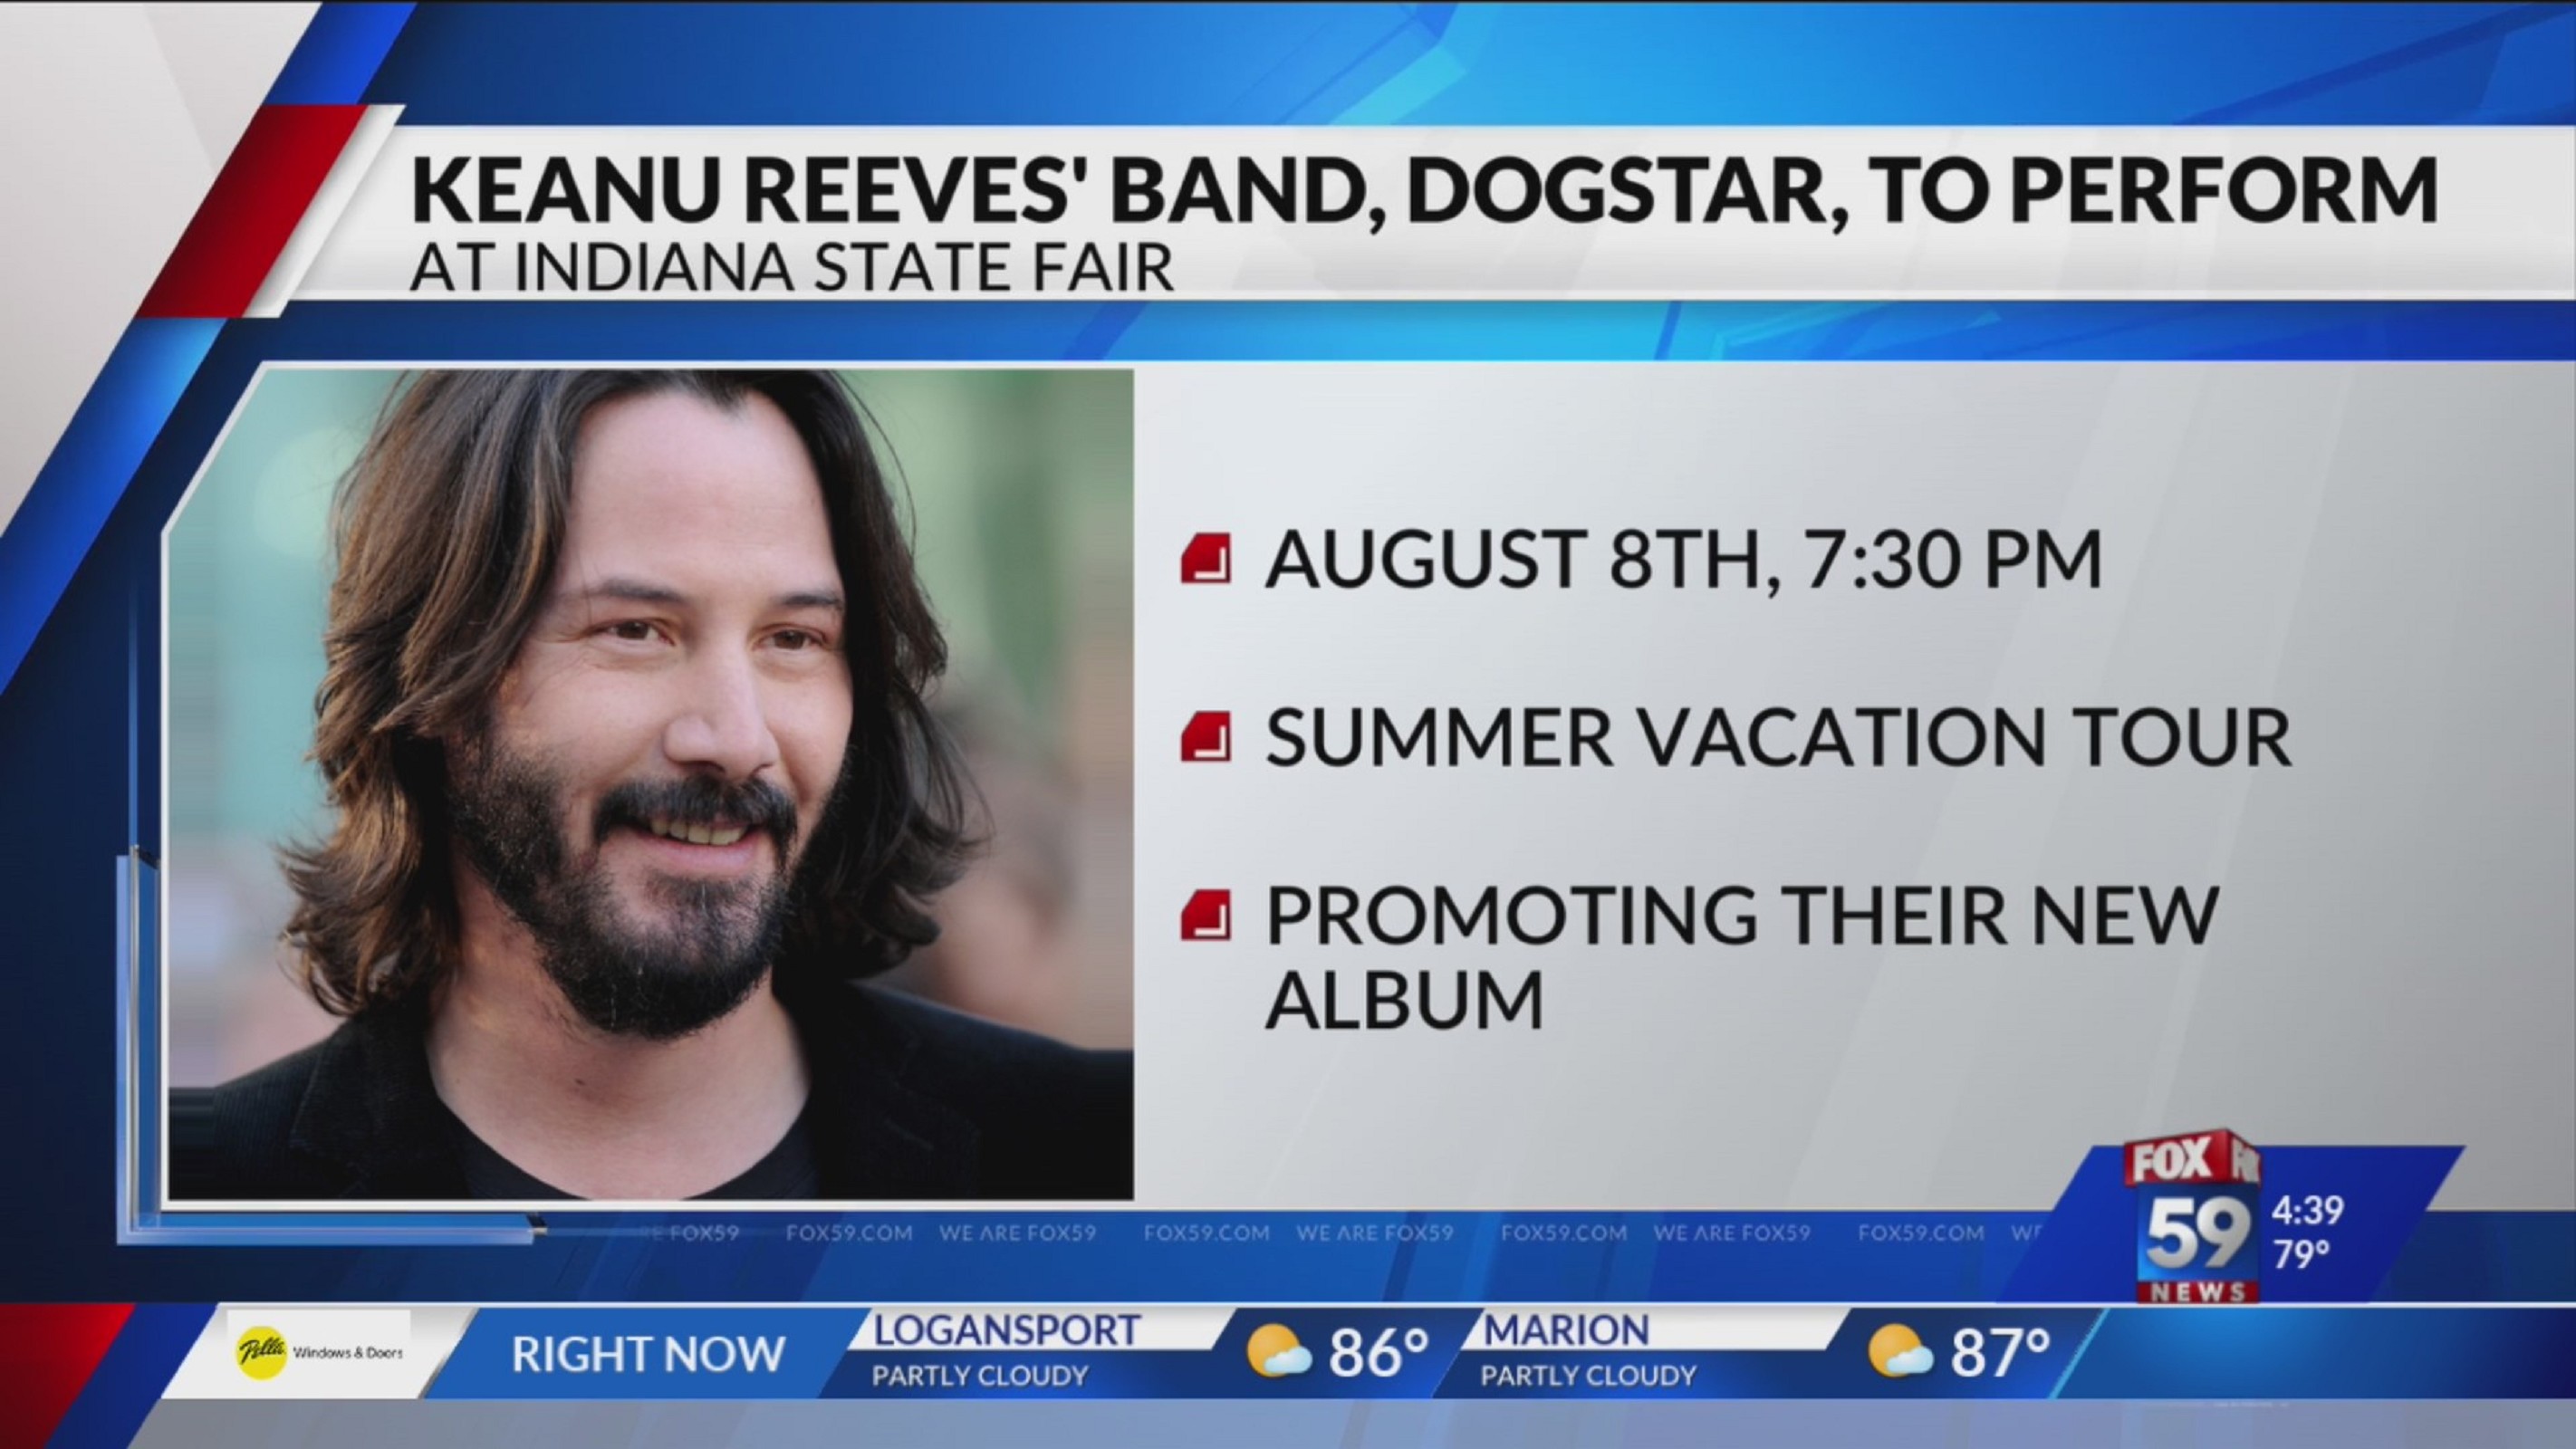 Keanu Reeves’ band, Dogstar, to perform at Indiana State Fair